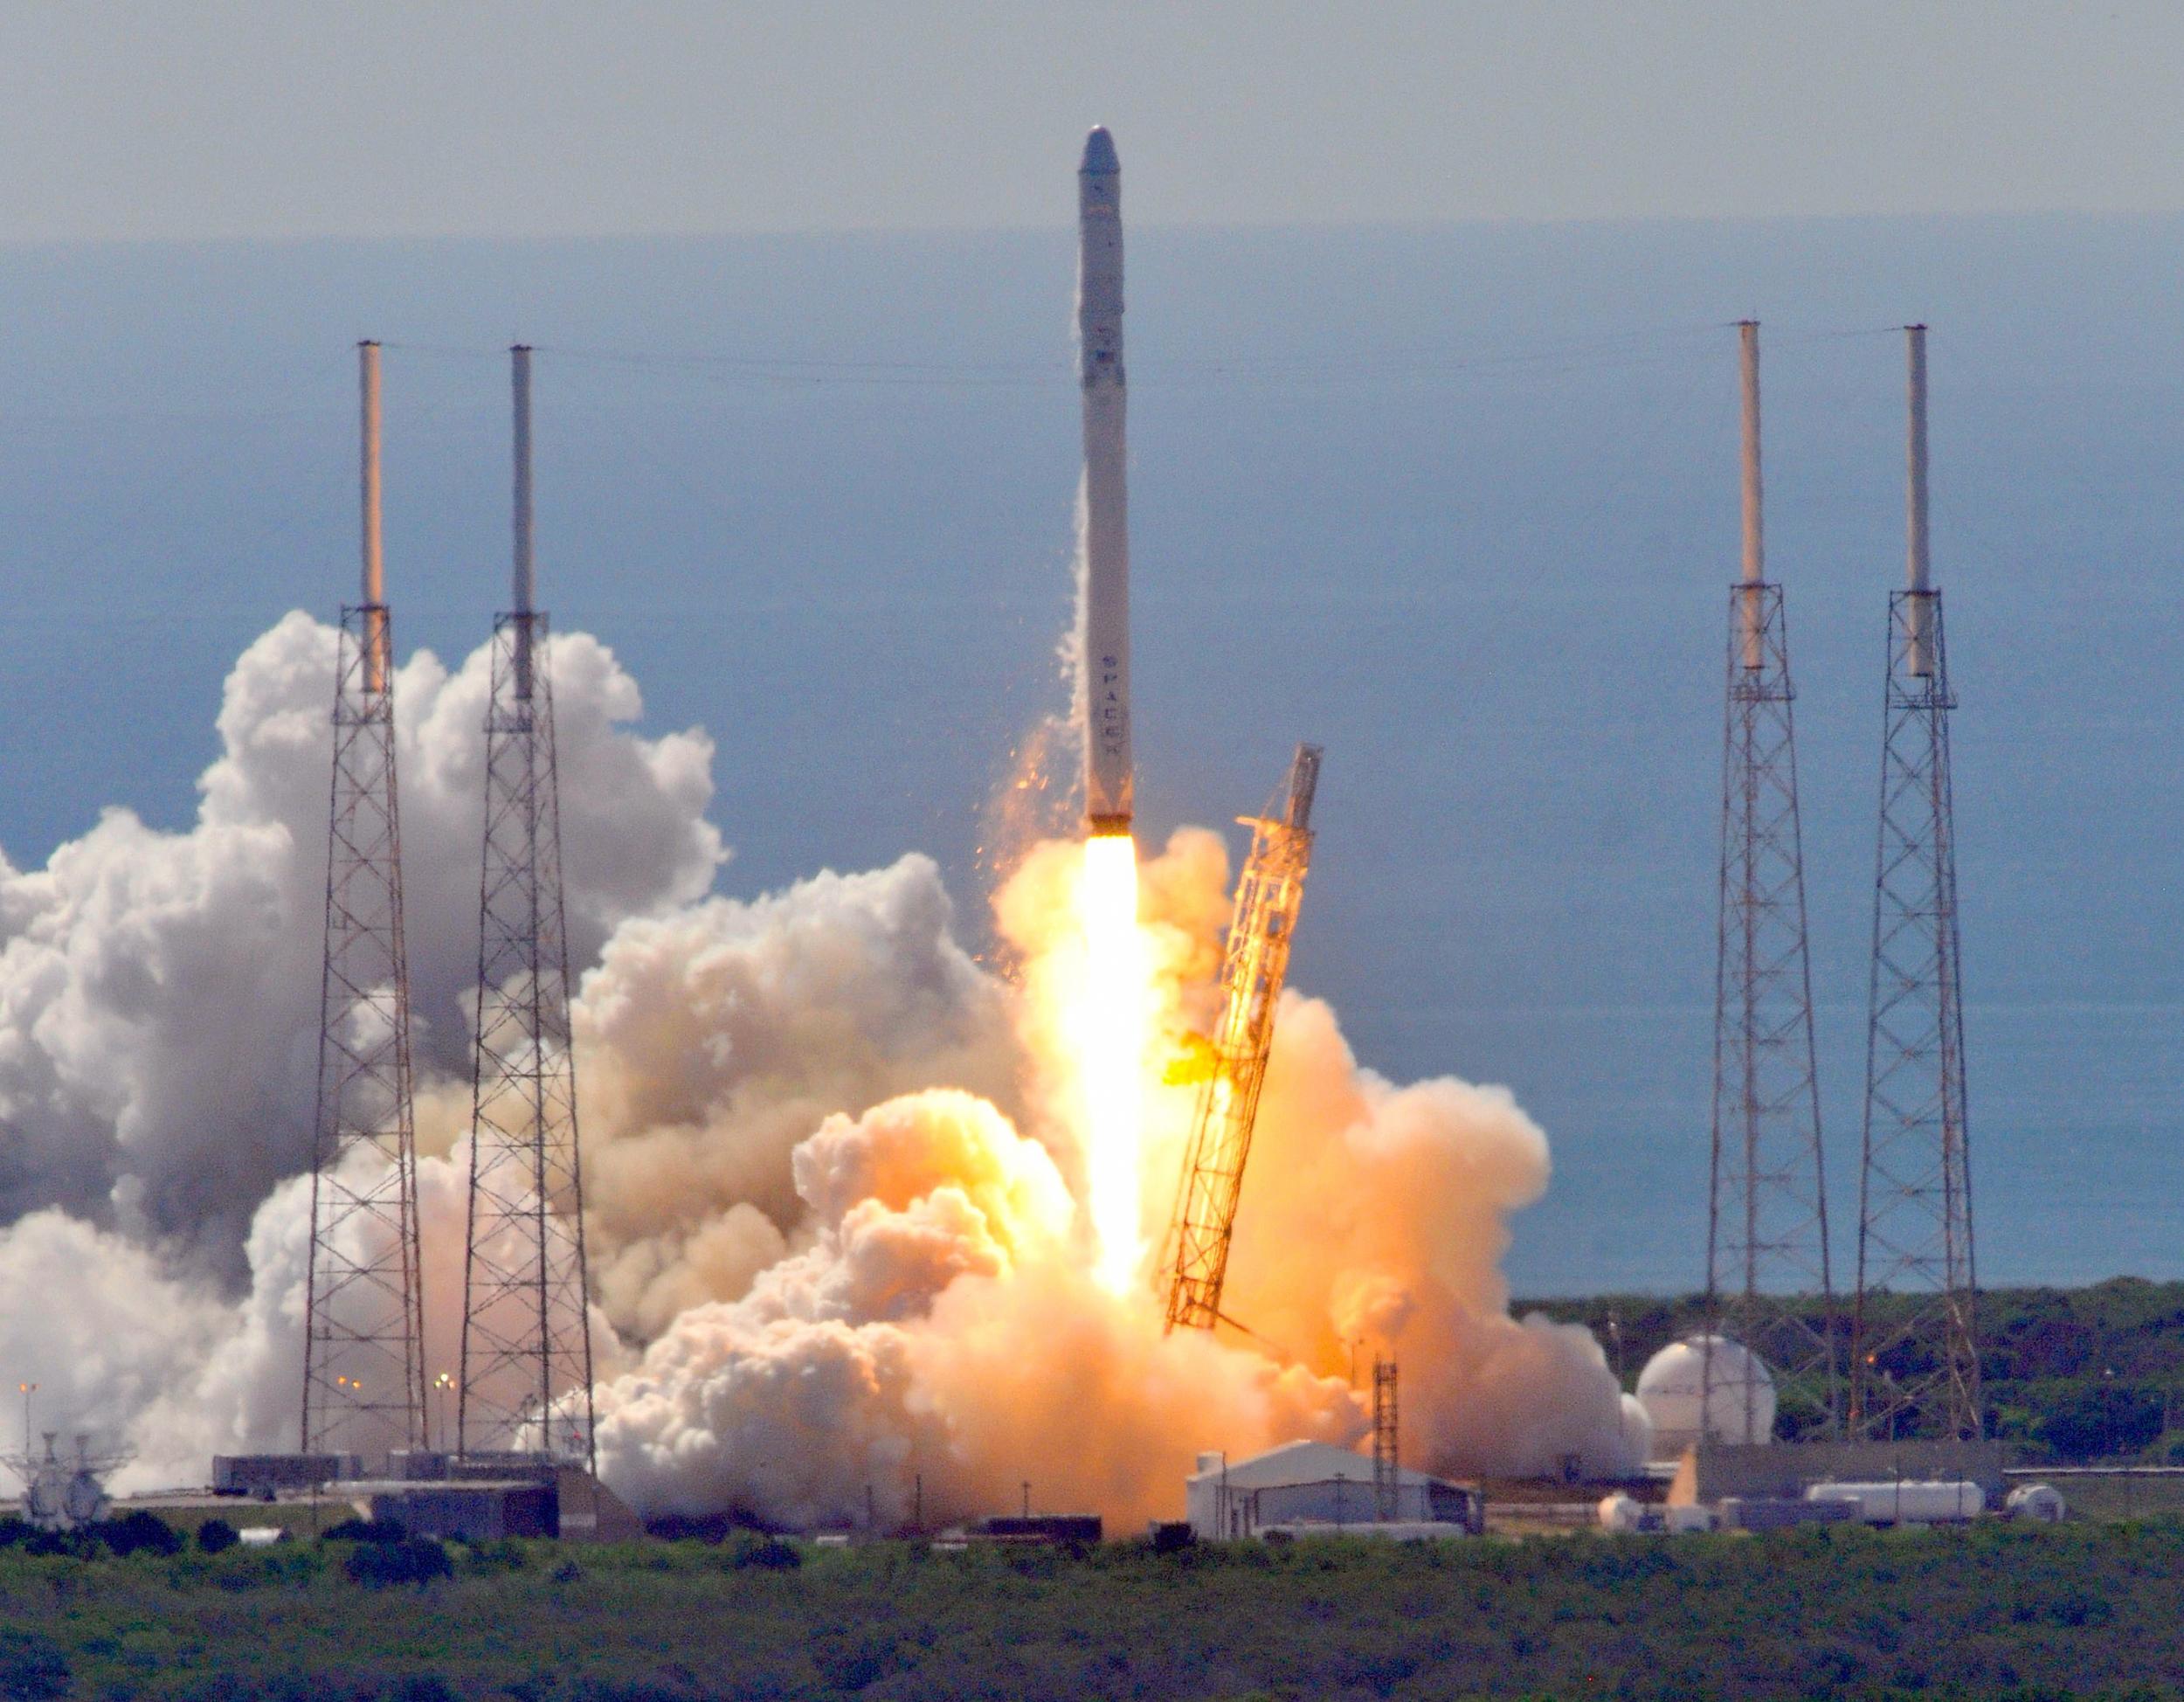 The SpaceX Falcon 9 rocket takes off, shortly before it blew up in June 2015